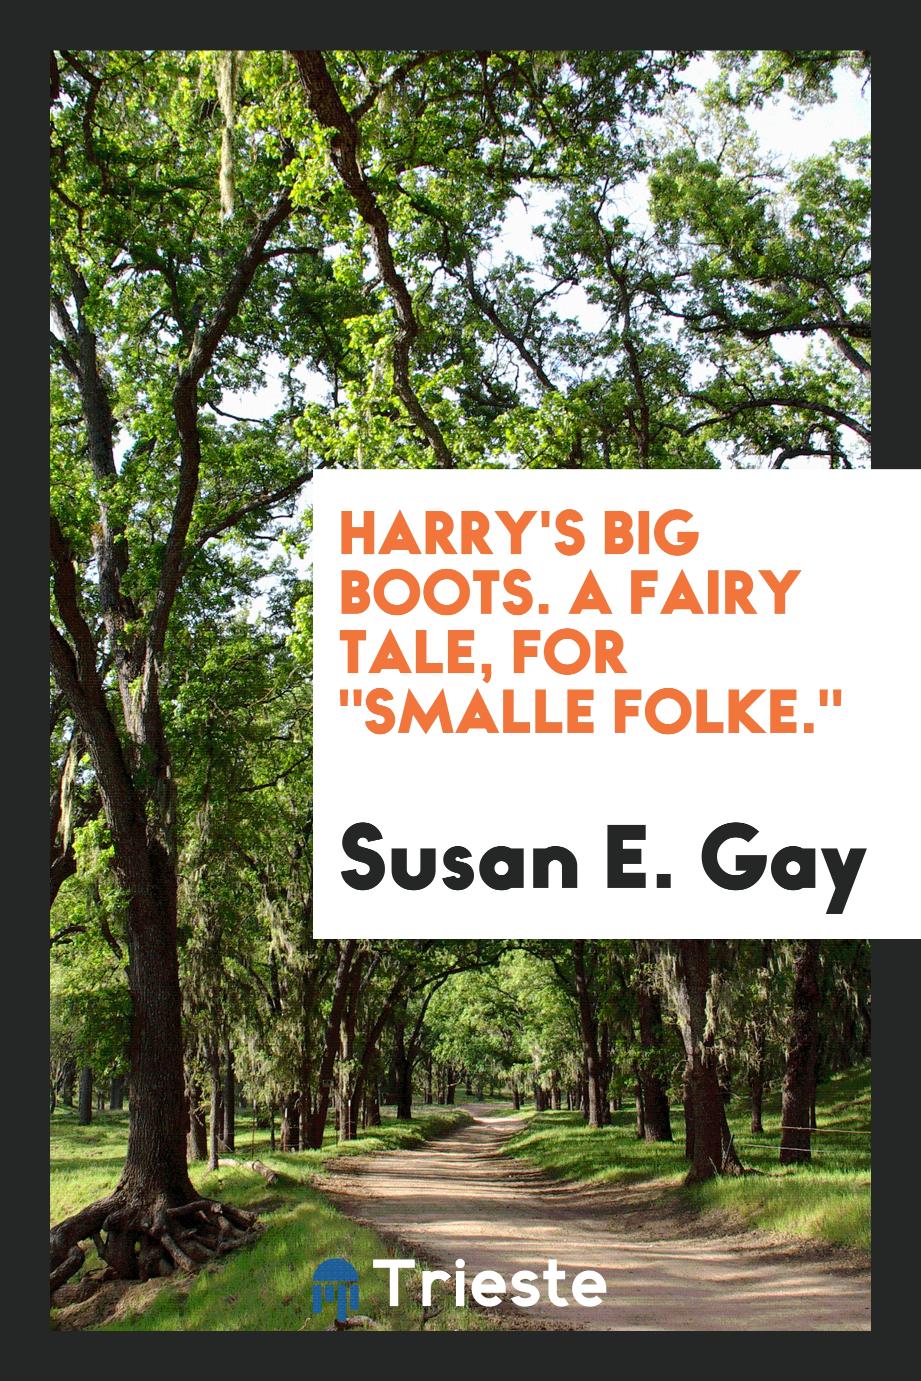 Harry's big boots. A fairy tale, for "Smalle folke."